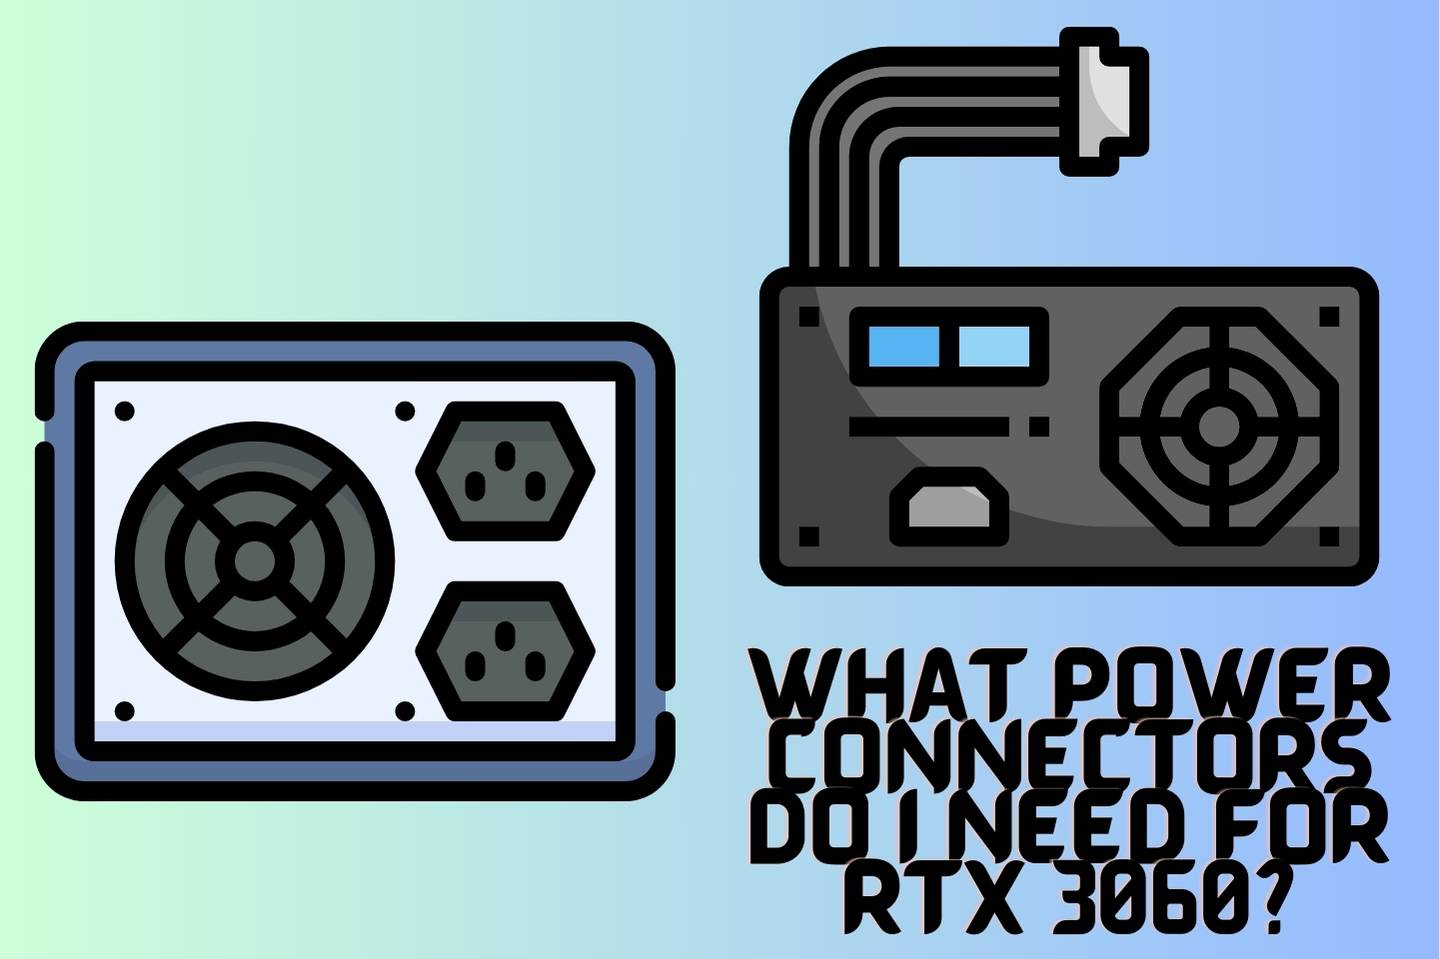 What Power Connectors Do I Need for RTX 3060